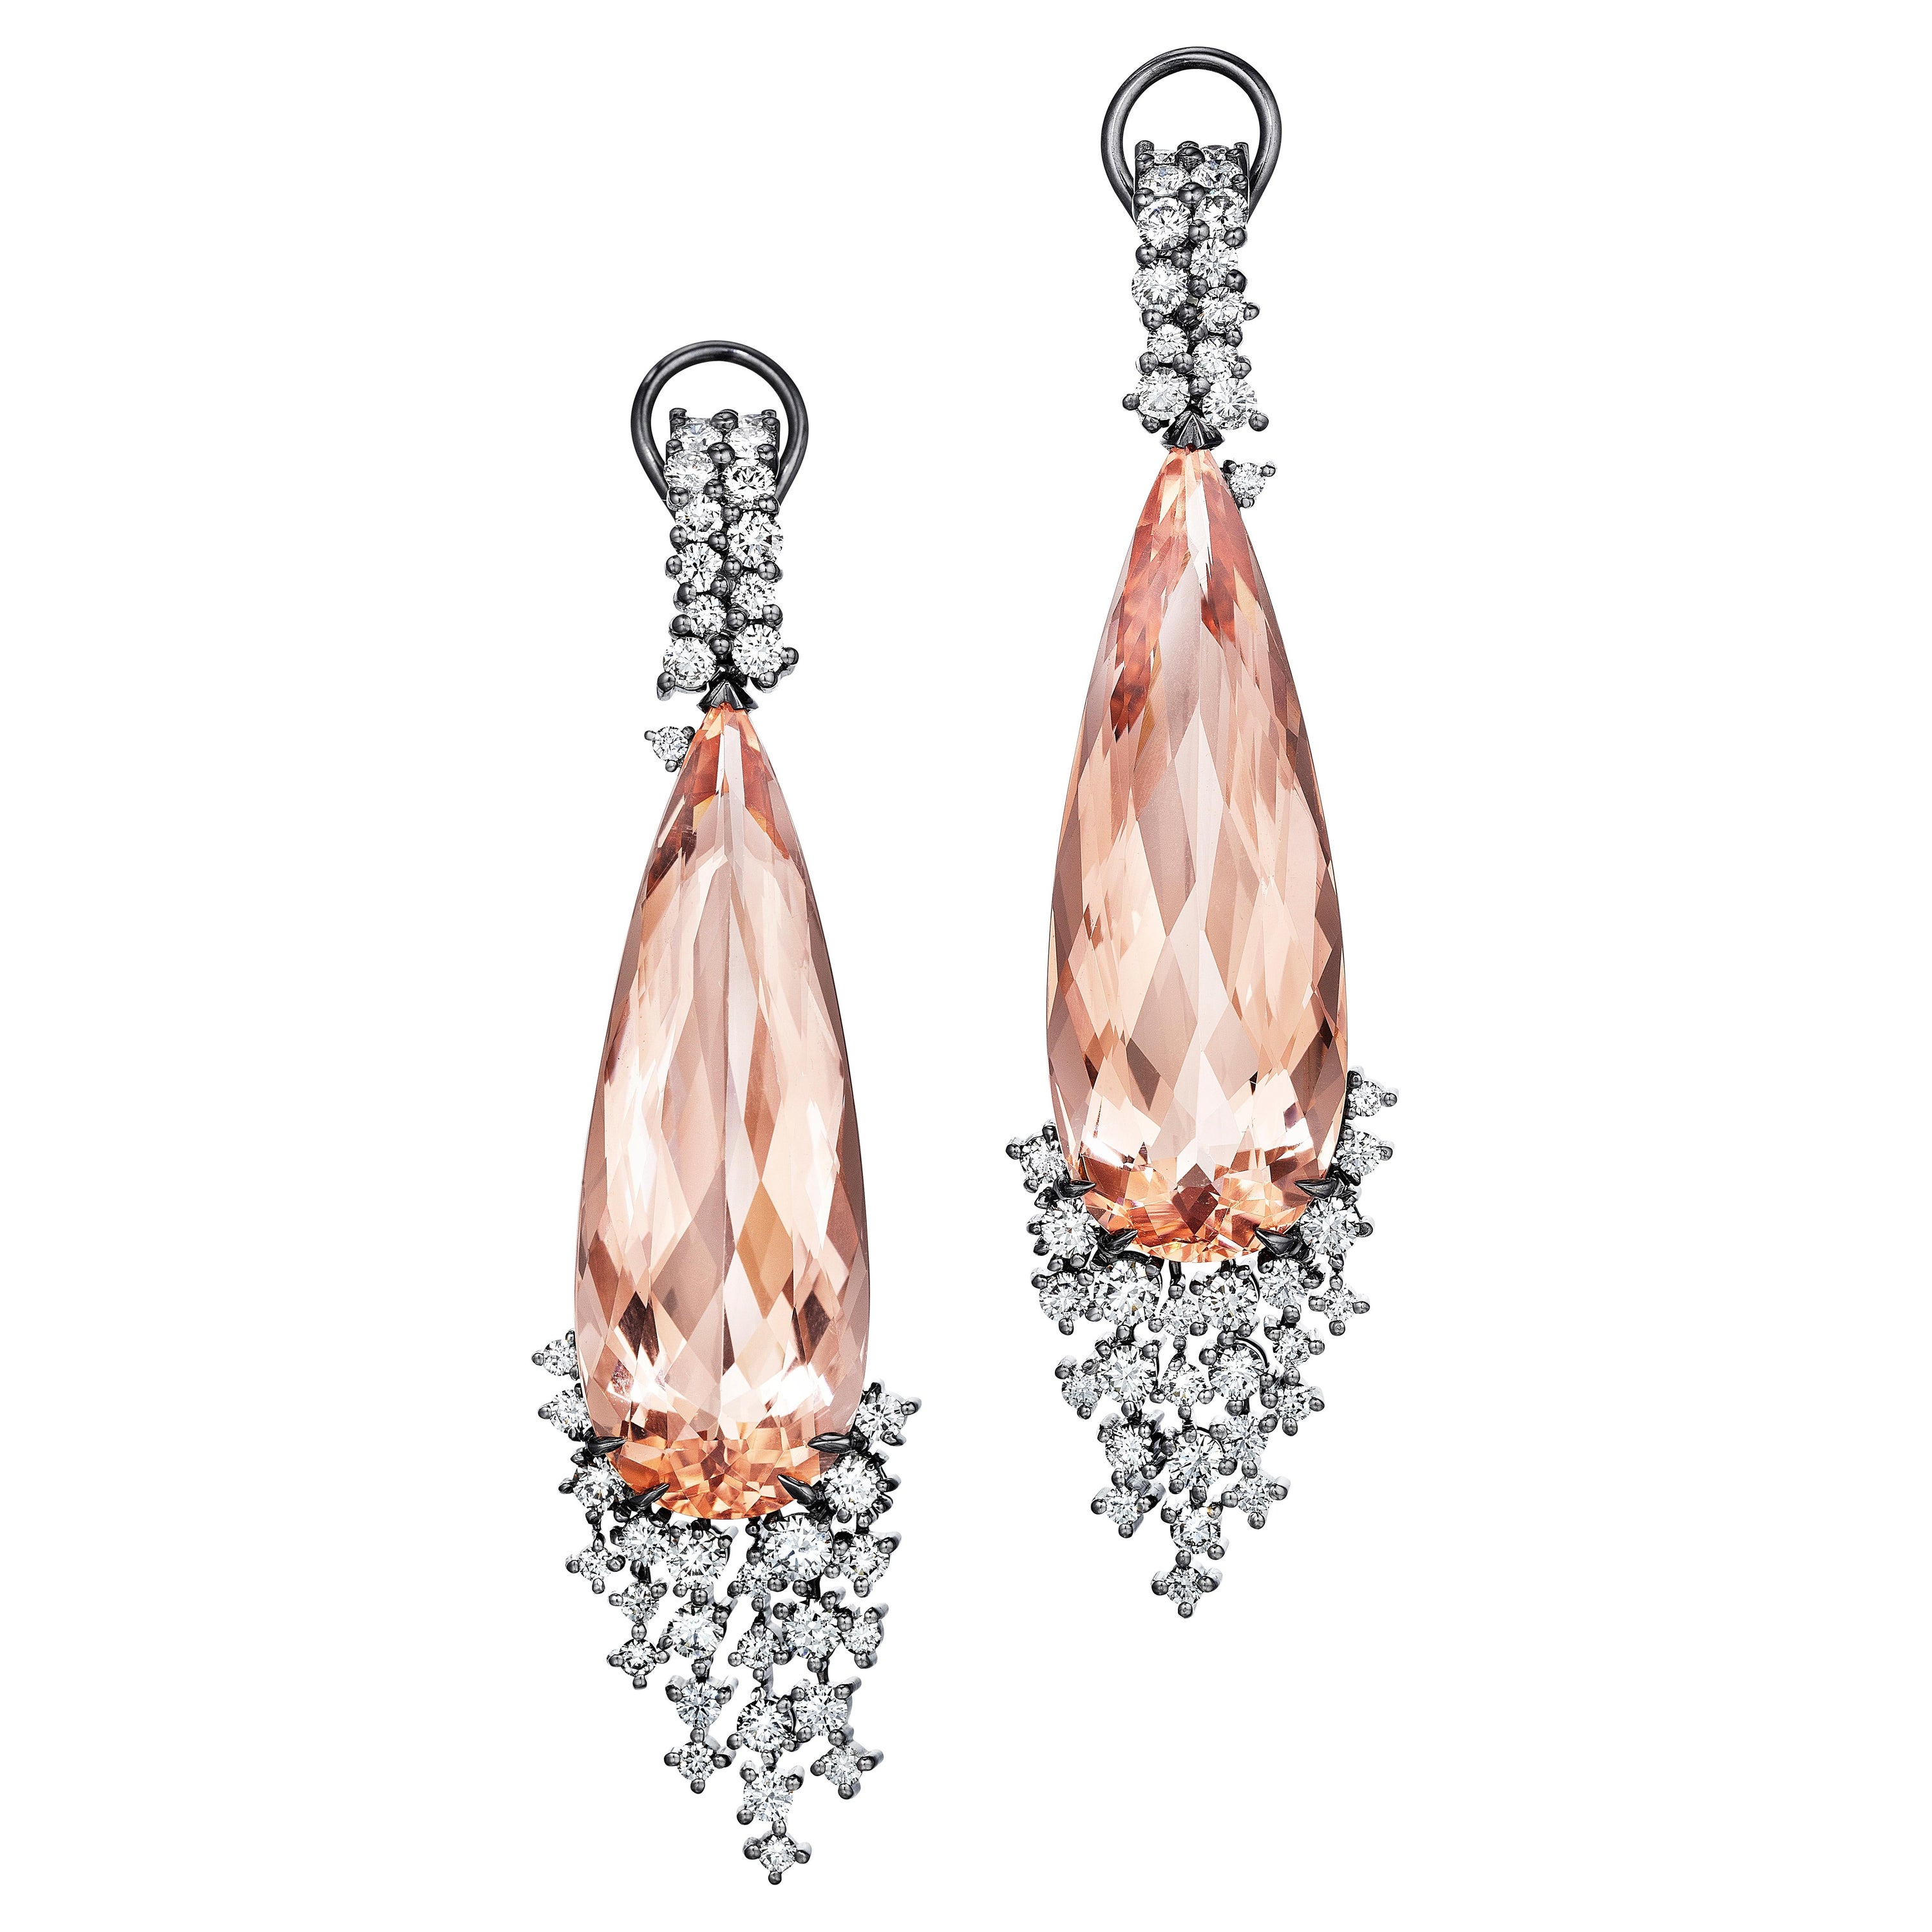 Melting Ice Morganite and Diamond Drop Earrings by MadStone For Sale